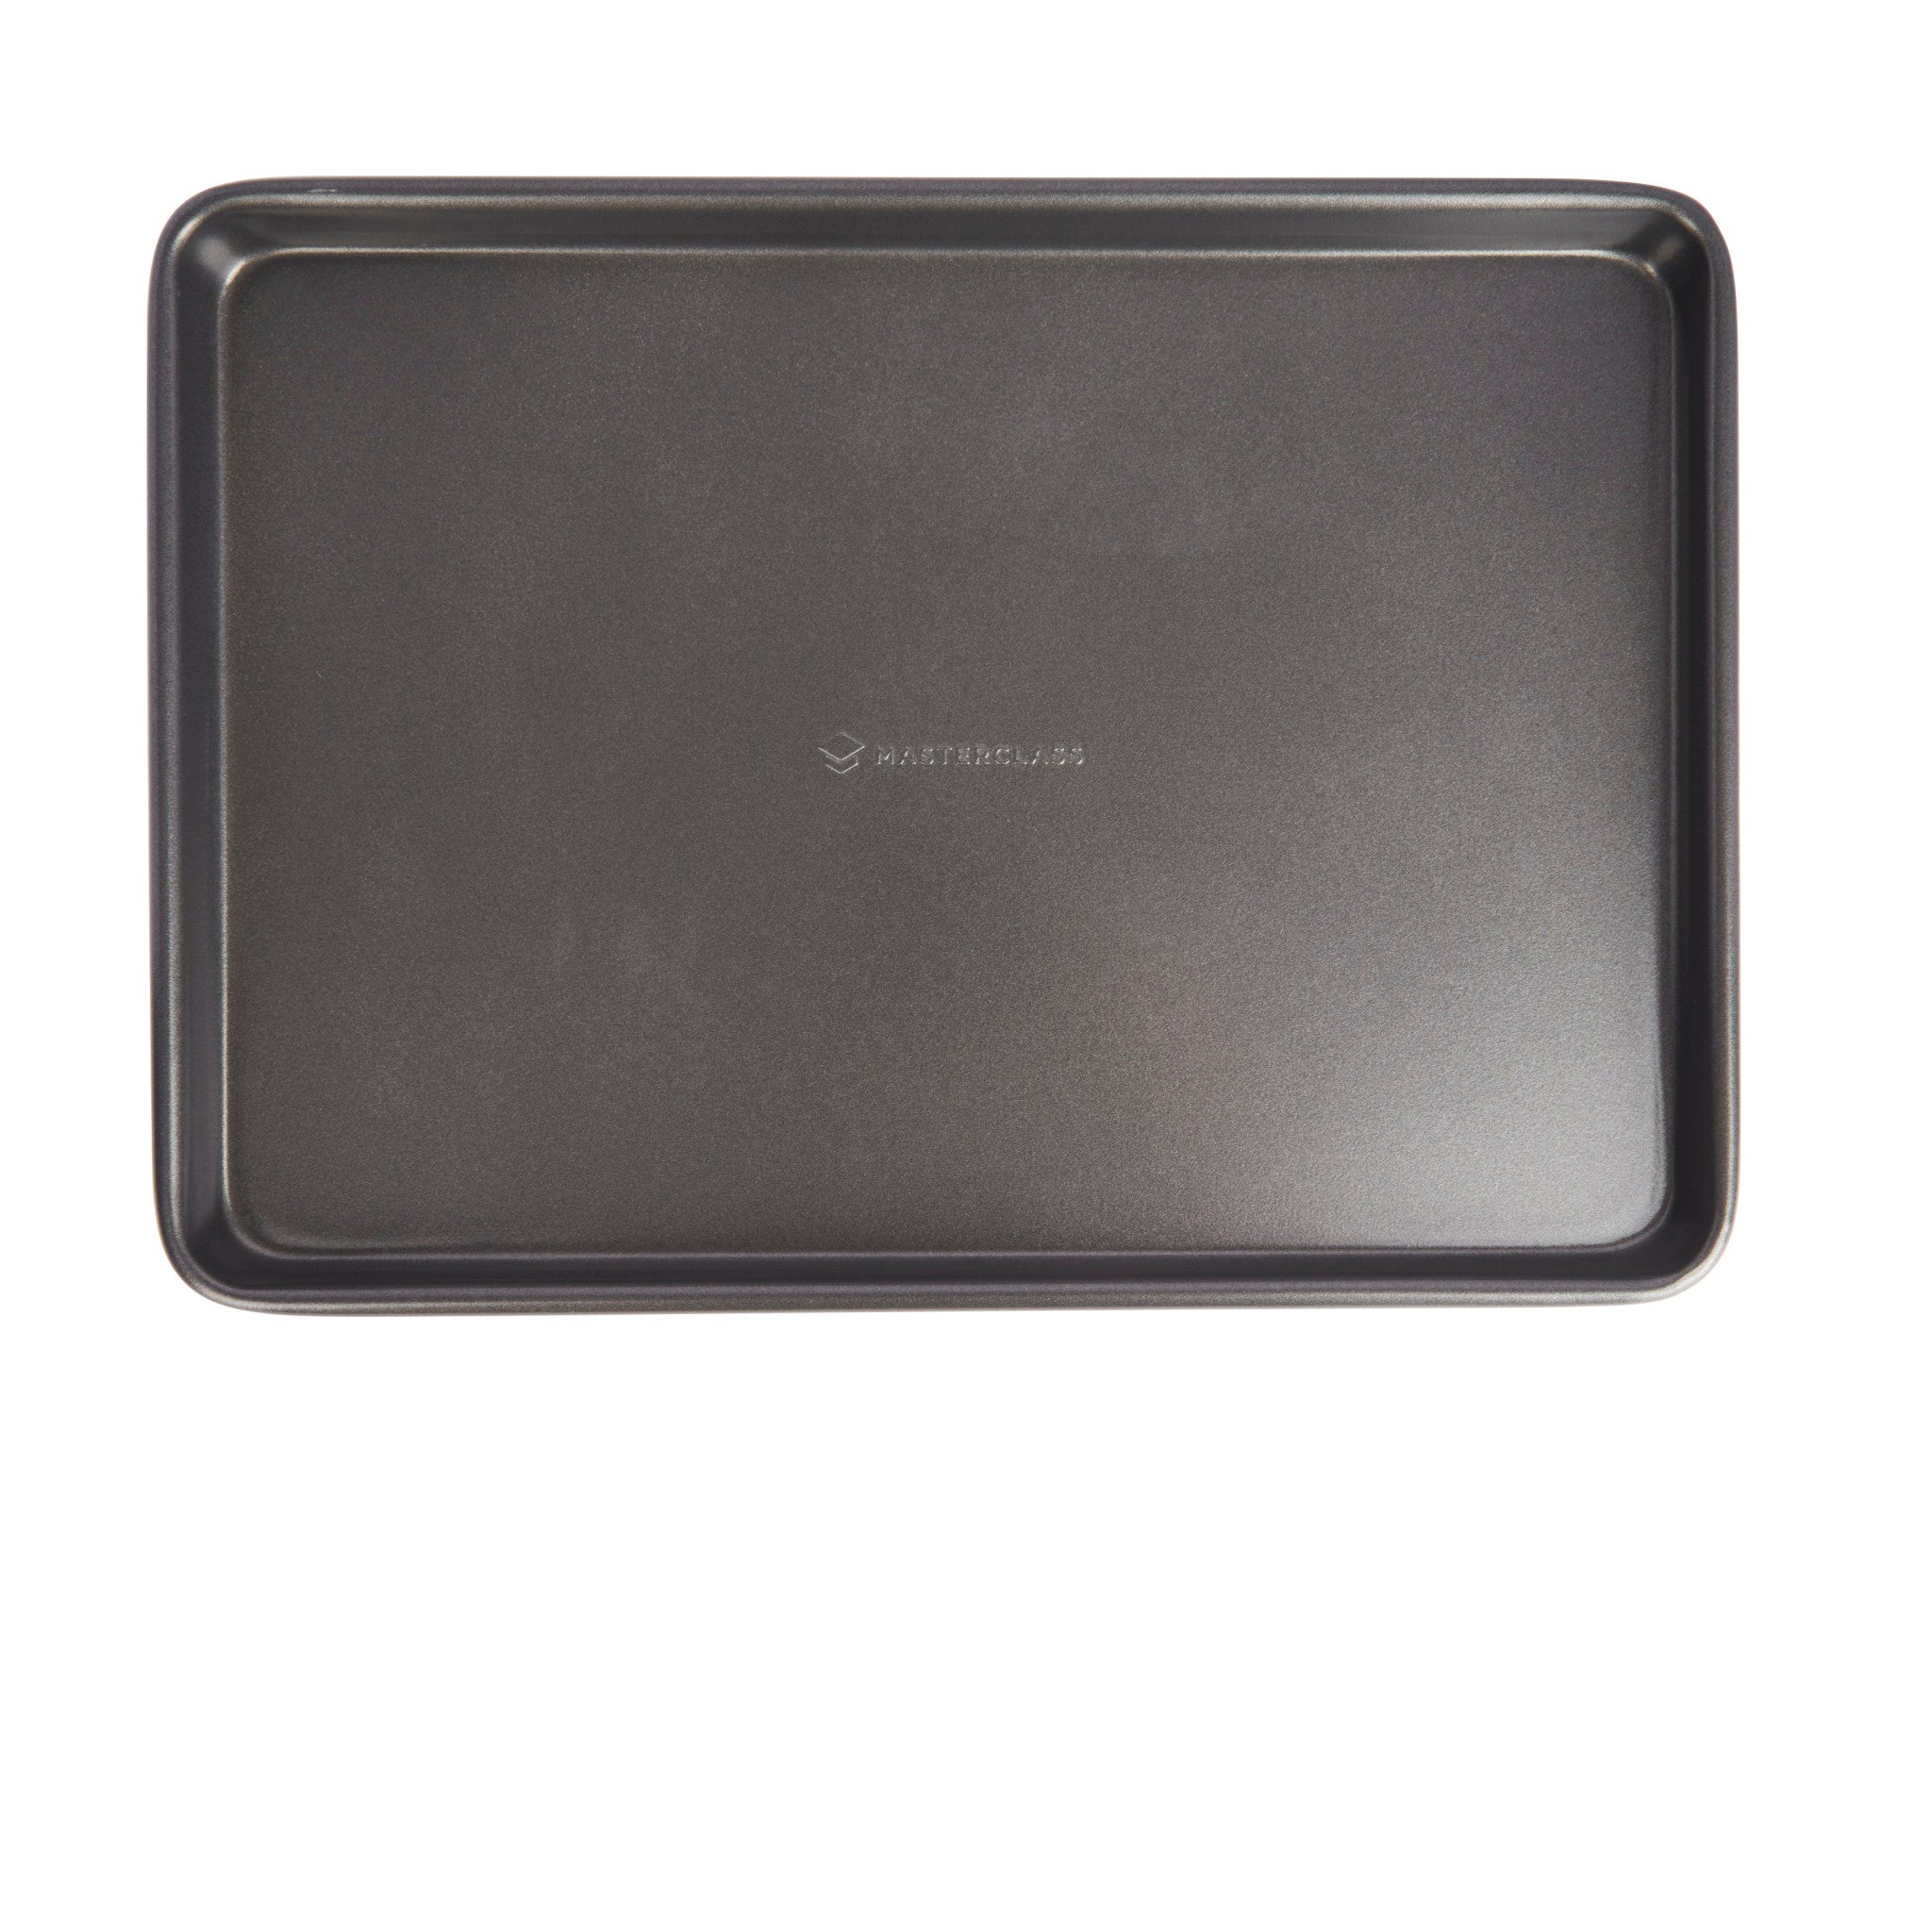 Masterclass Baking Tray, Non-Stick Oven Tray for Baking and Roasting 35x25x2cm, Sleeved